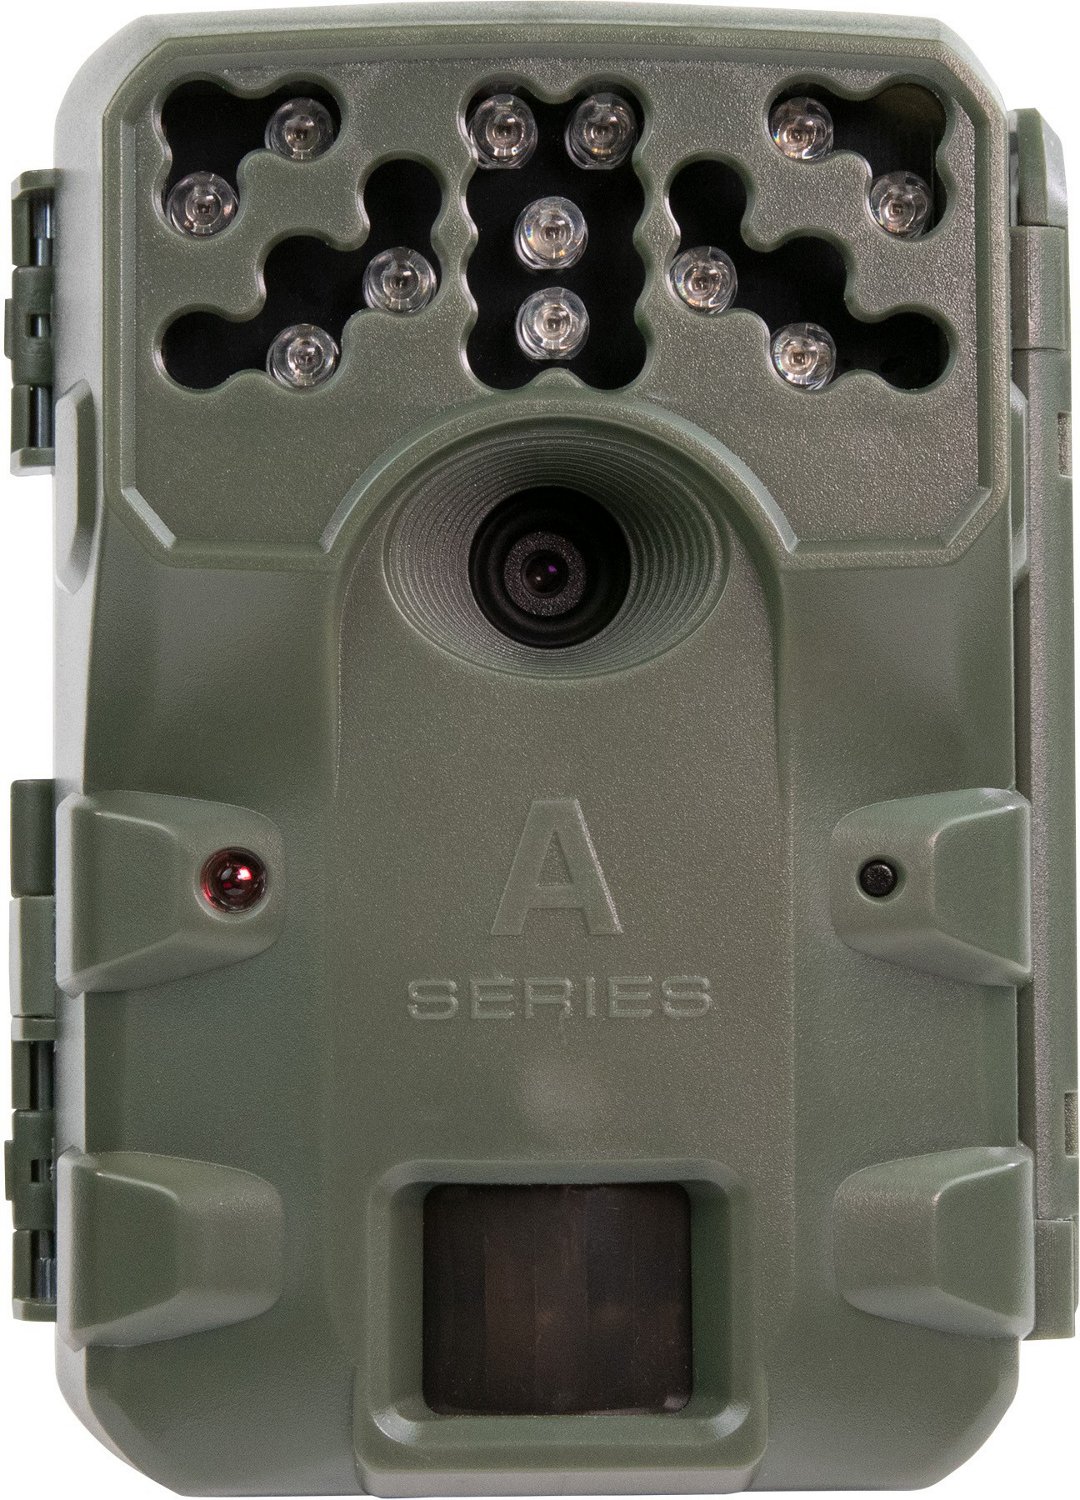 Moultrie AC-350 Trail Camera | Academy